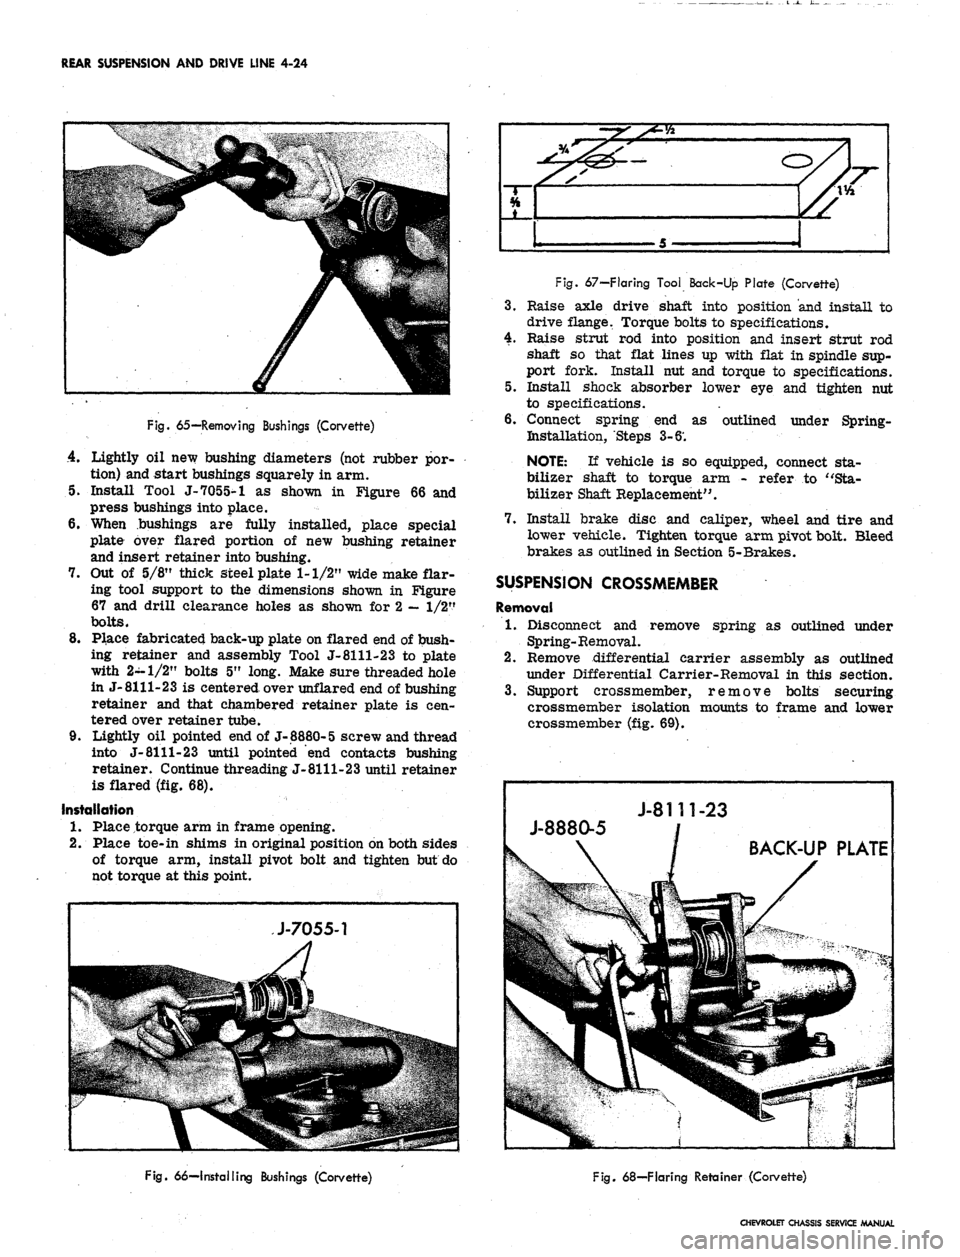 CHEVROLET CAMARO 1967 1.G Chassis Workshop Manual 
REAR SUSPENSION AND DRIVE LINE 4-24

4

i*
 5

Fig.
 65—Removing Bushings (Corvette)

4.
 Lightly oil new bushing diameters (not rubber por-

tion) and start bushings squarely in arm.

5. Install T